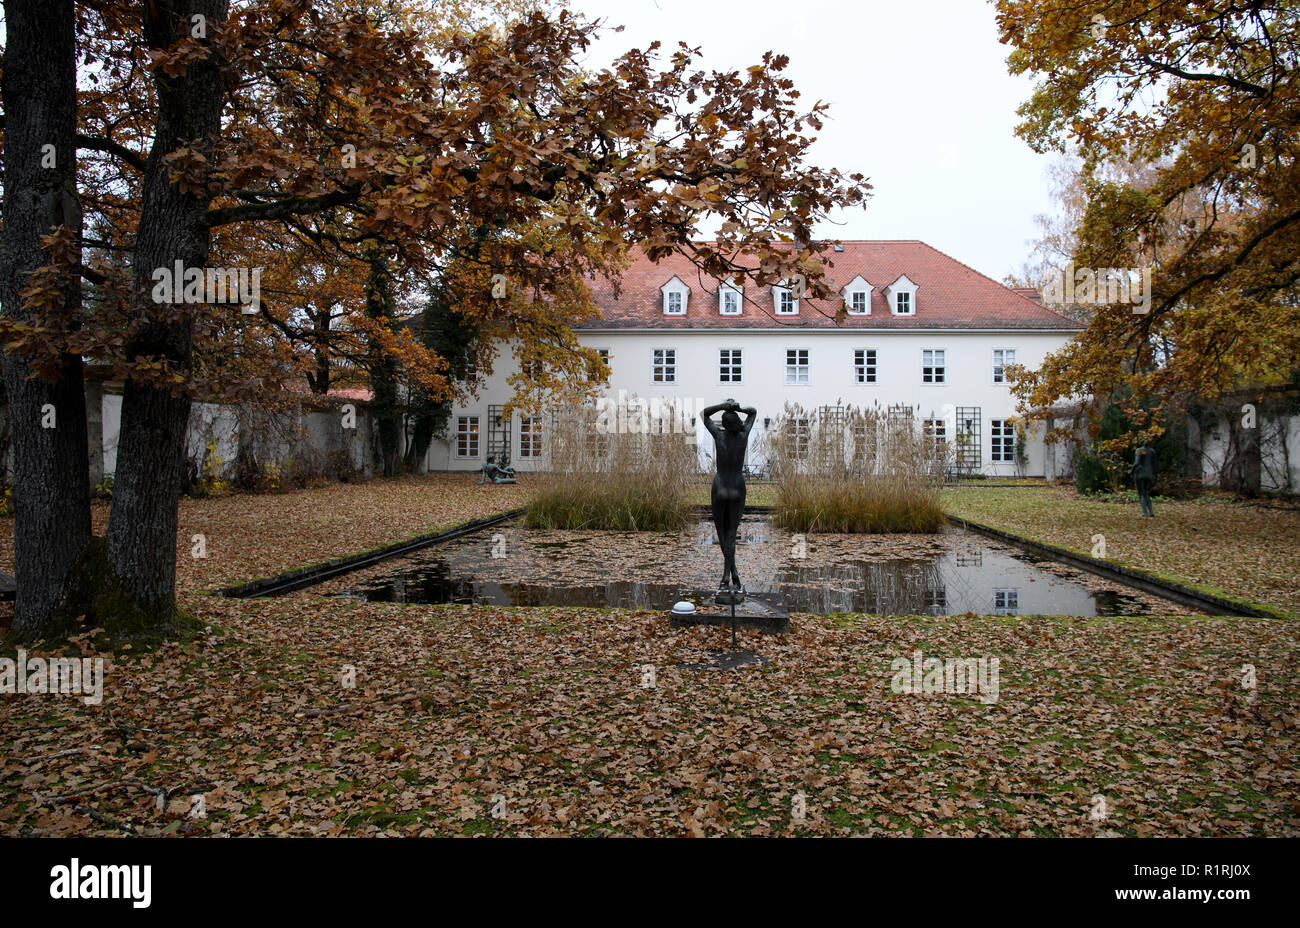 Pullach, Germany. 09th Nov, 2018. The president's villa on the premises of the Federal Intelligence Service (BND). The villa was once the residence of Martin Bormann, head of the party office of the NSDAP and a confidant of Hitler, and belonged to the former Reichssiedlung Rudolf Heß, which was built between 1936 and 1938. From 1947, the buildings were used by the Gehlen organization and later by the Federal Intelligence Service (BND). Credit: Sven Hoppe/dpa/Alamy Live News Stock Photo